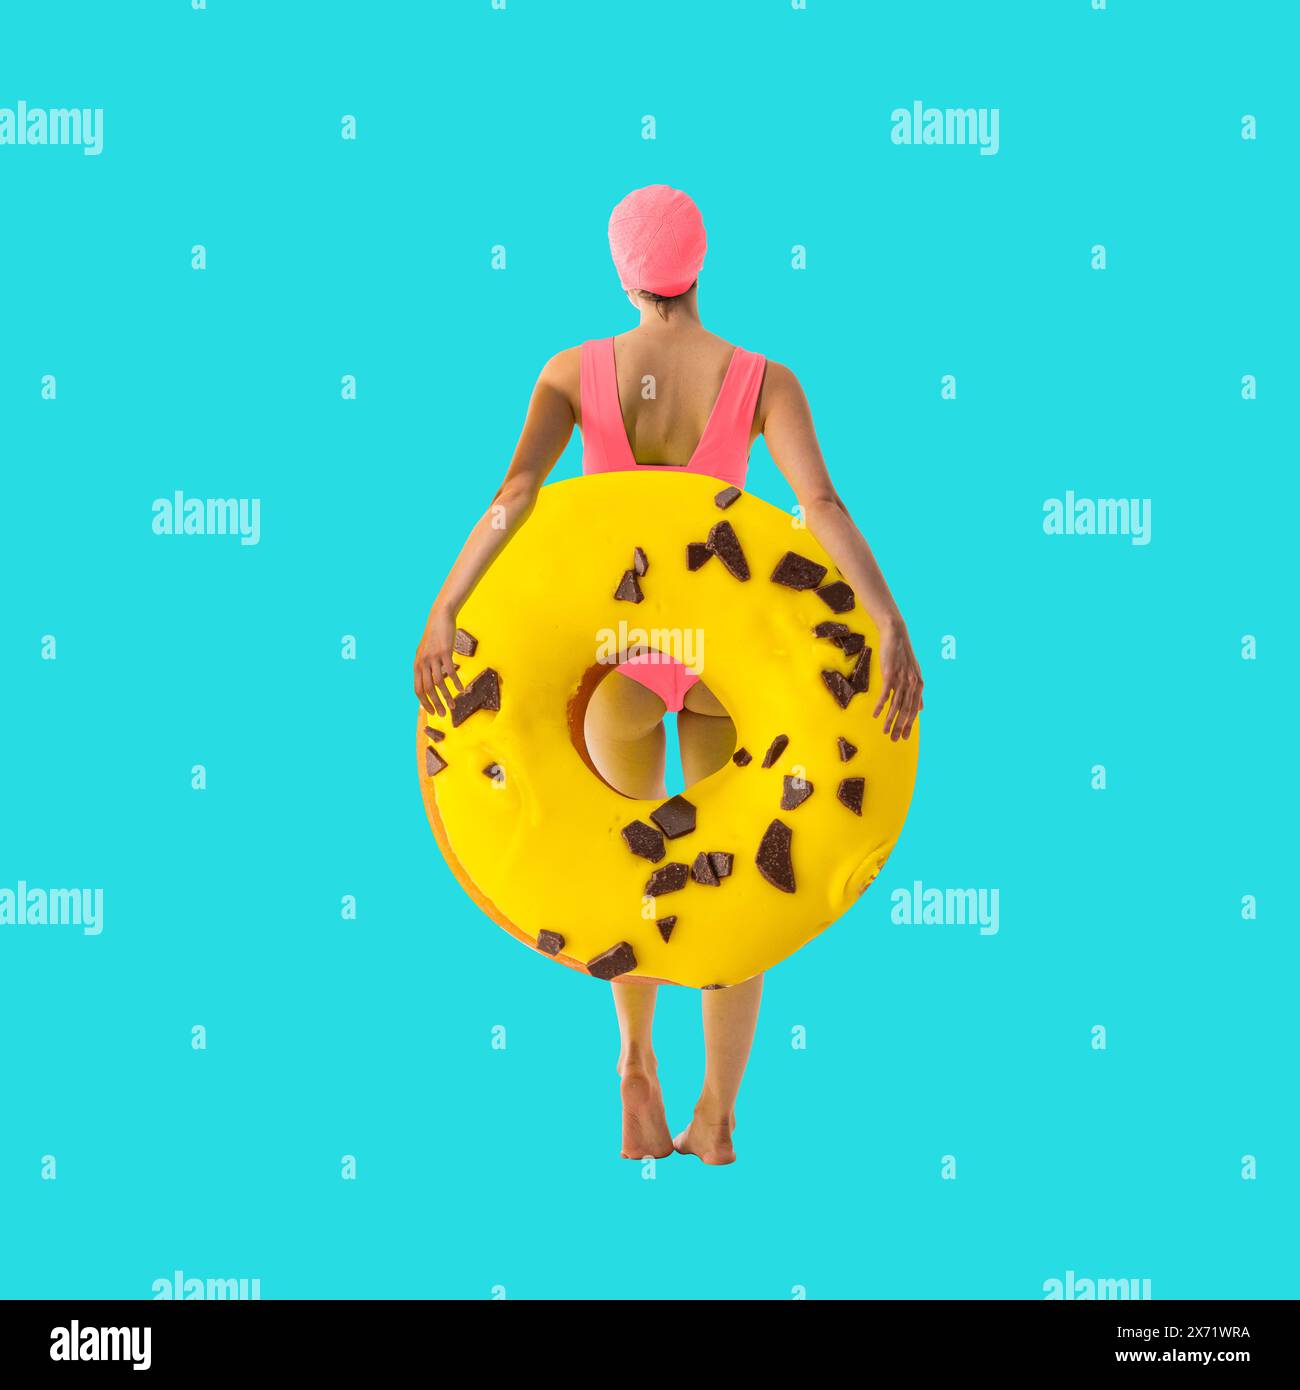 Back view of woman in swimming cap standing with giant donut with marshmallow decoration. Swimming hobby. Contemporary art collage. Stock Photo